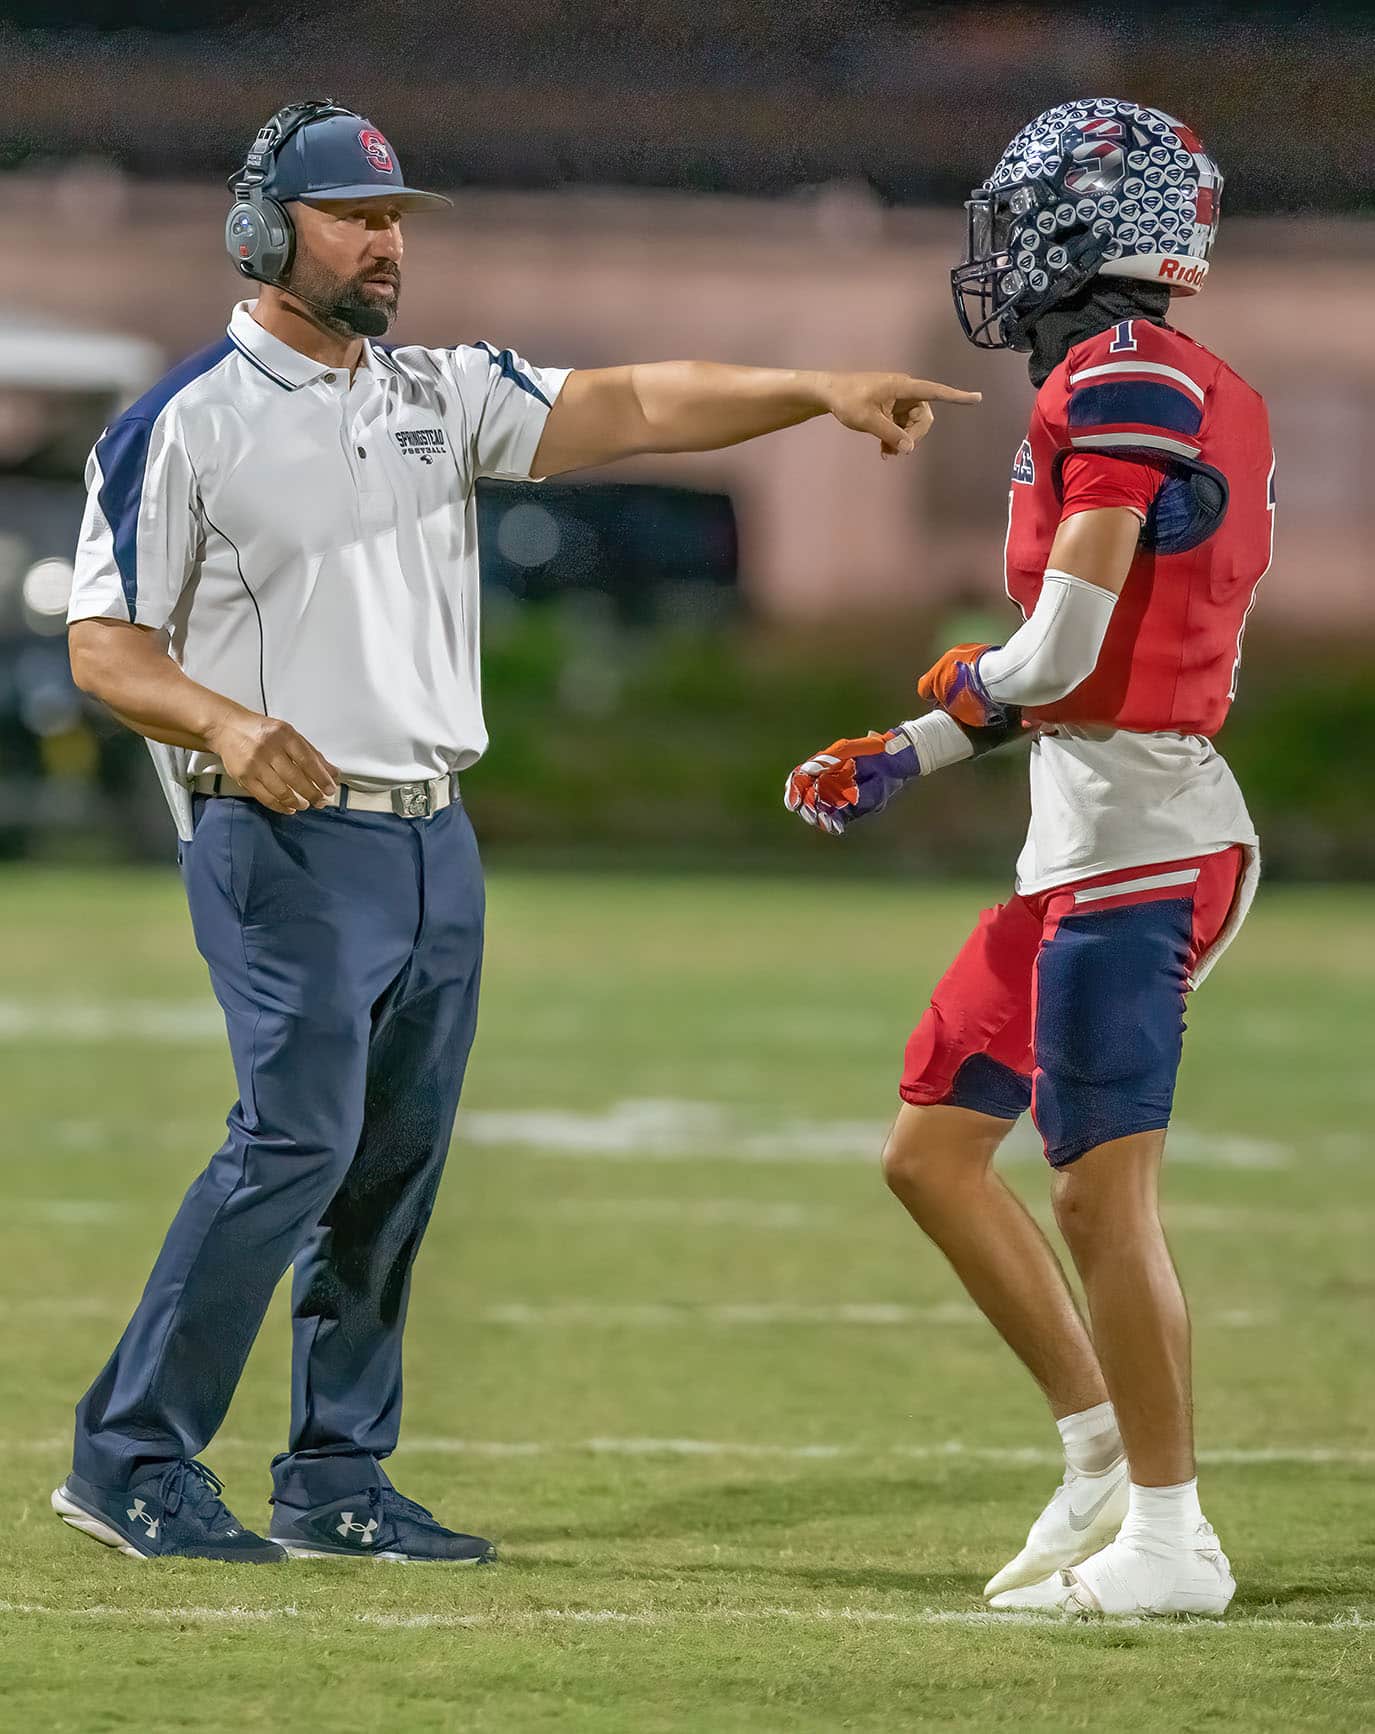 Springstead Head Coach Mike Garafalo details a play to ,1, Luca Garguilo during the first half of the win over Lecanto. Photo by JOE DiCRISTOFALO